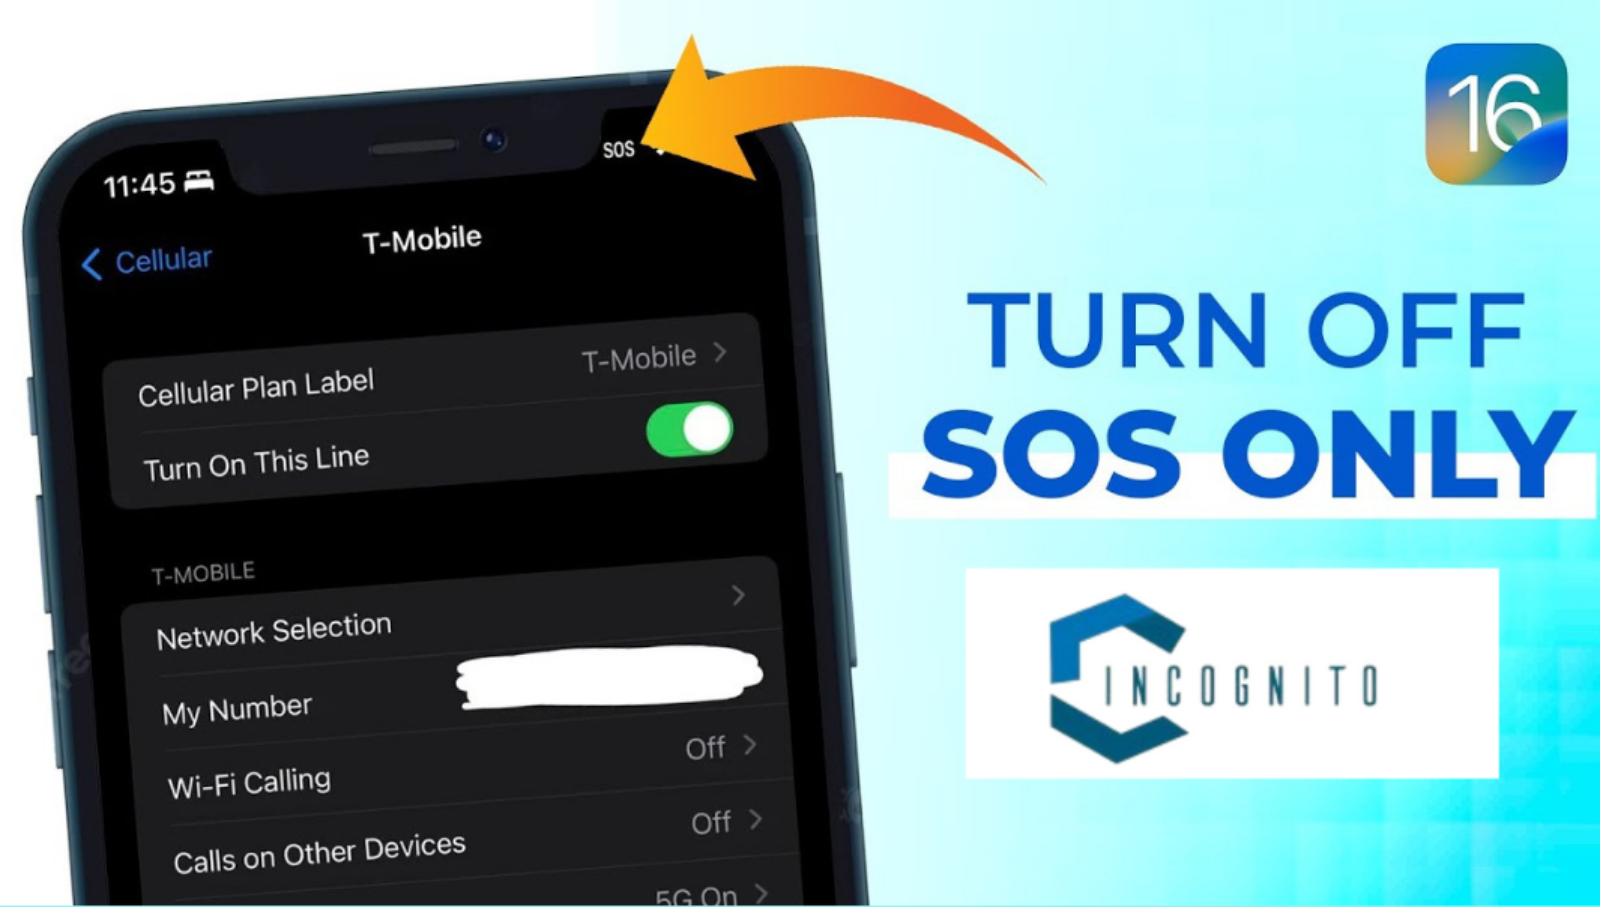 How to Turn Off SOS